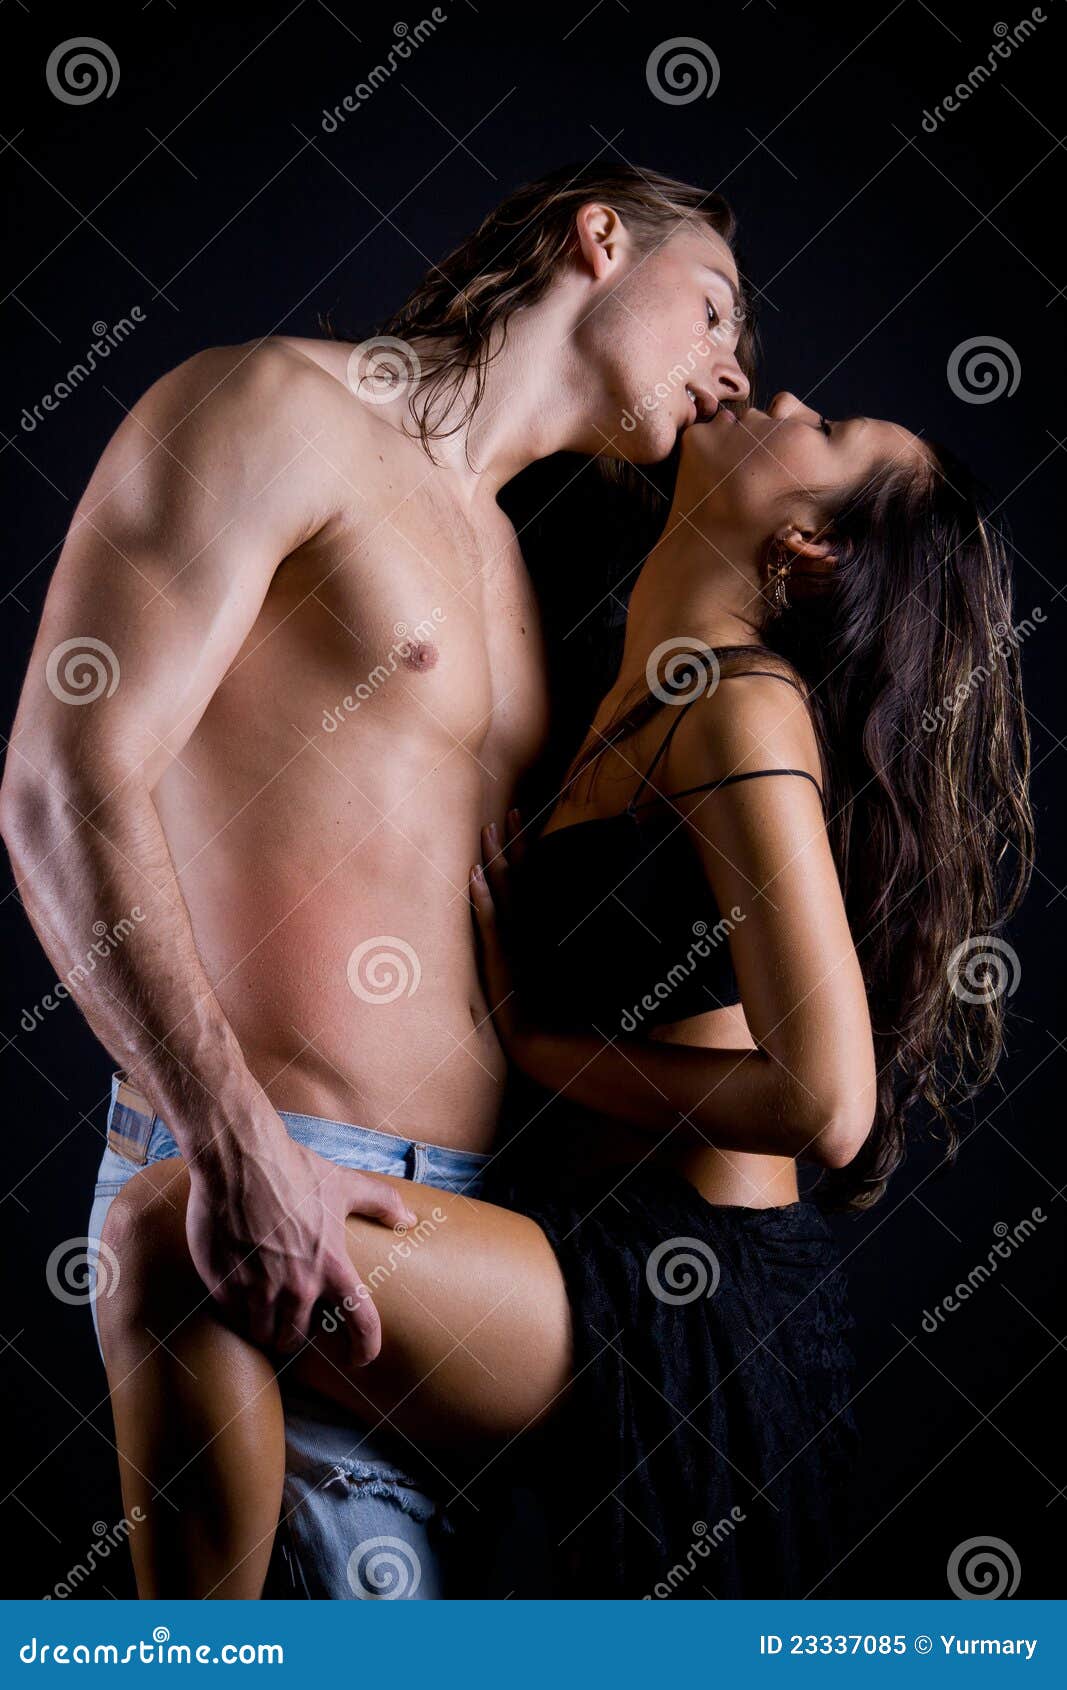 Sexual Foreplay, Girl in Hug of a of a Strong Man Stock Image pic